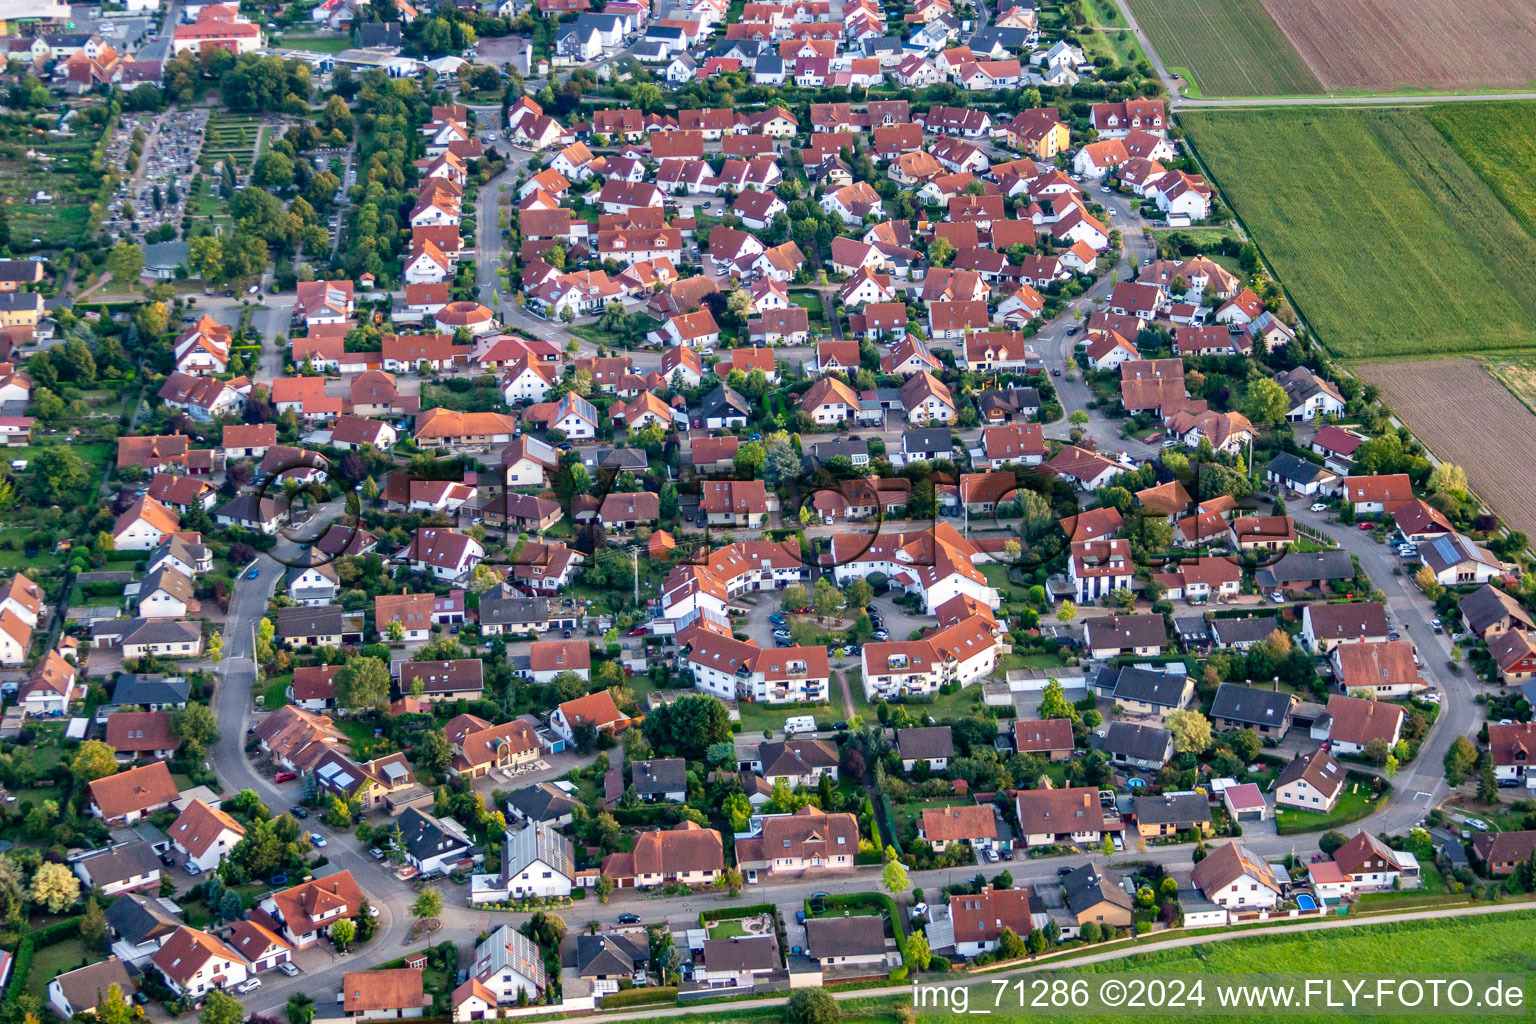 Offenbach an der Queich in the state Rhineland-Palatinate, Germany from above